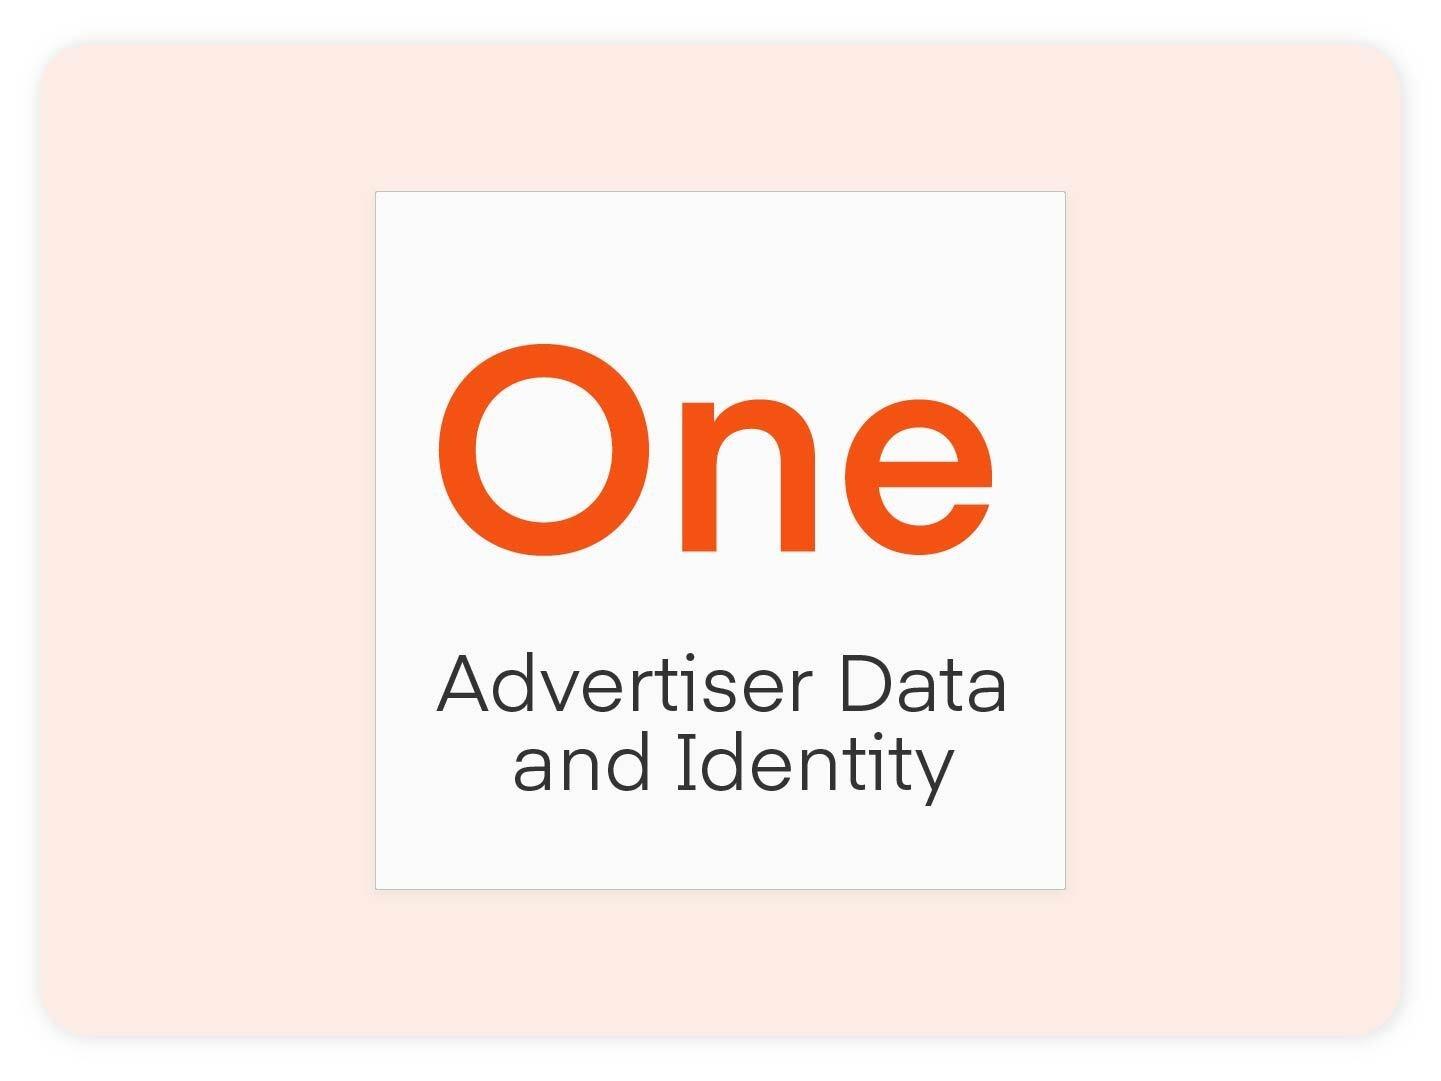 One - Advertiser Data and Identity